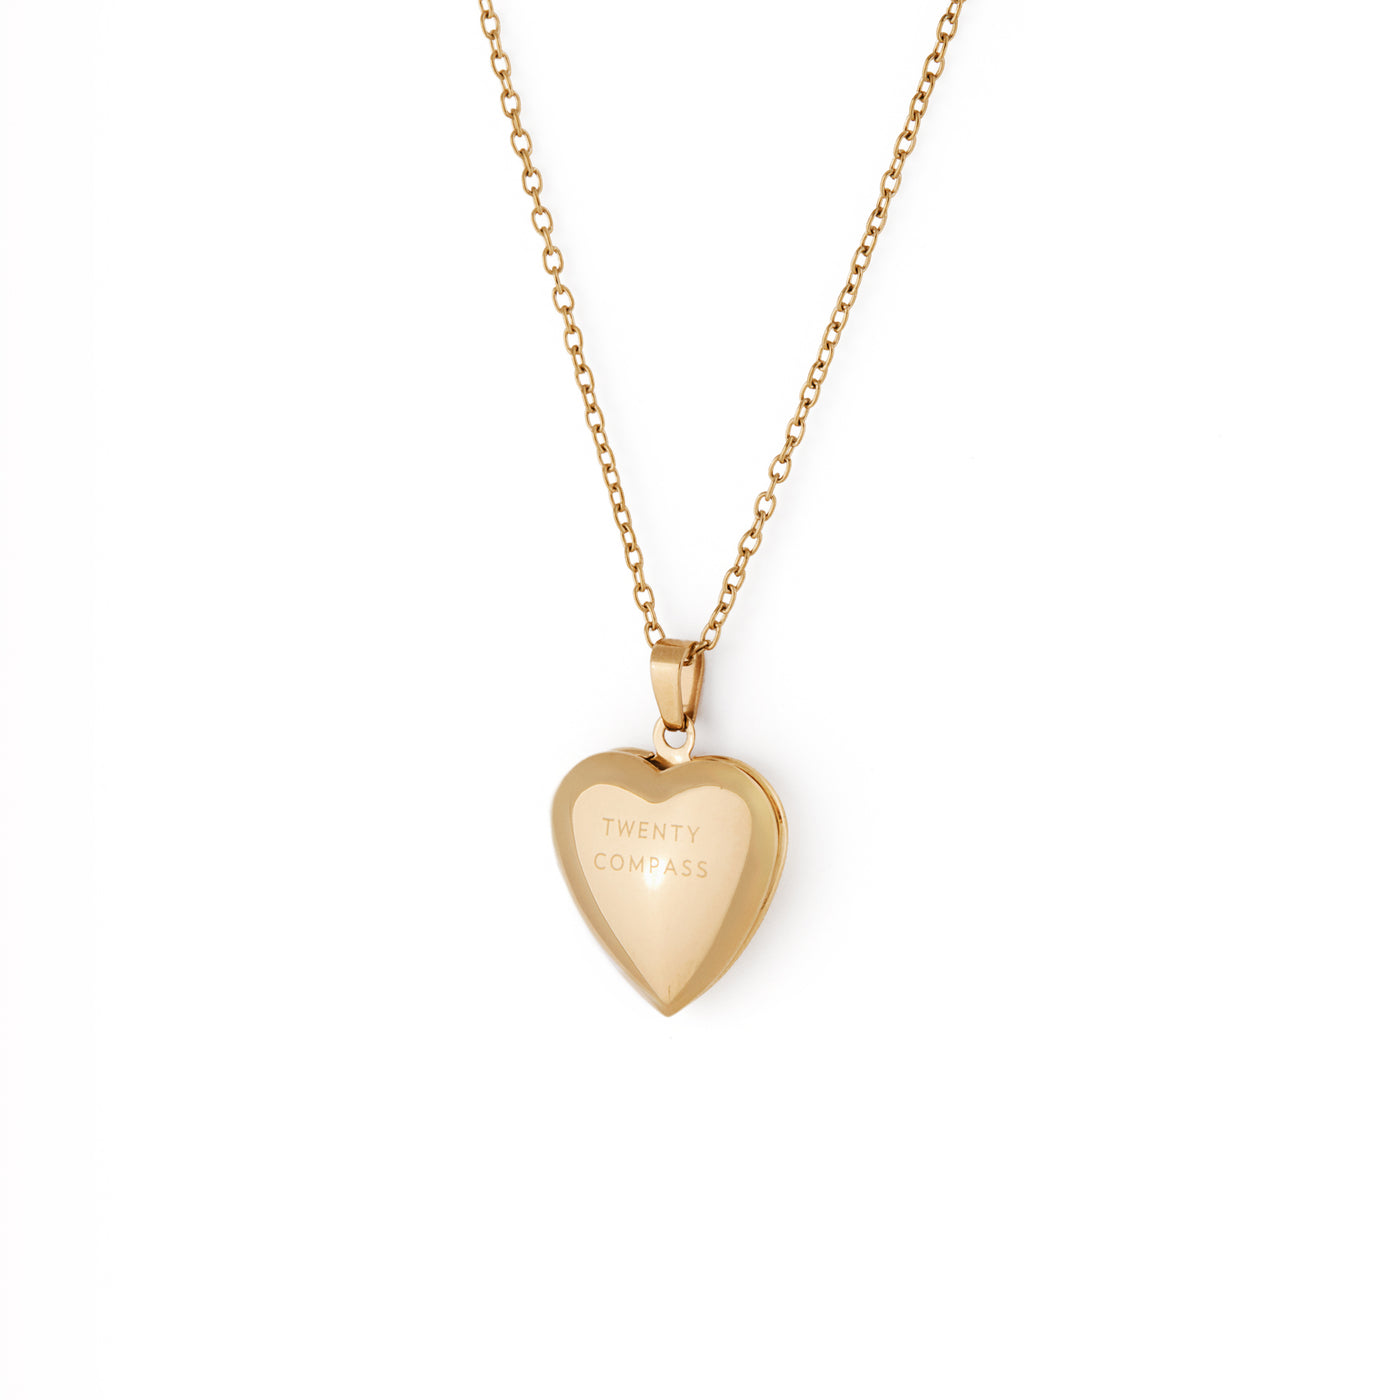 Daydream Necklace - Gold